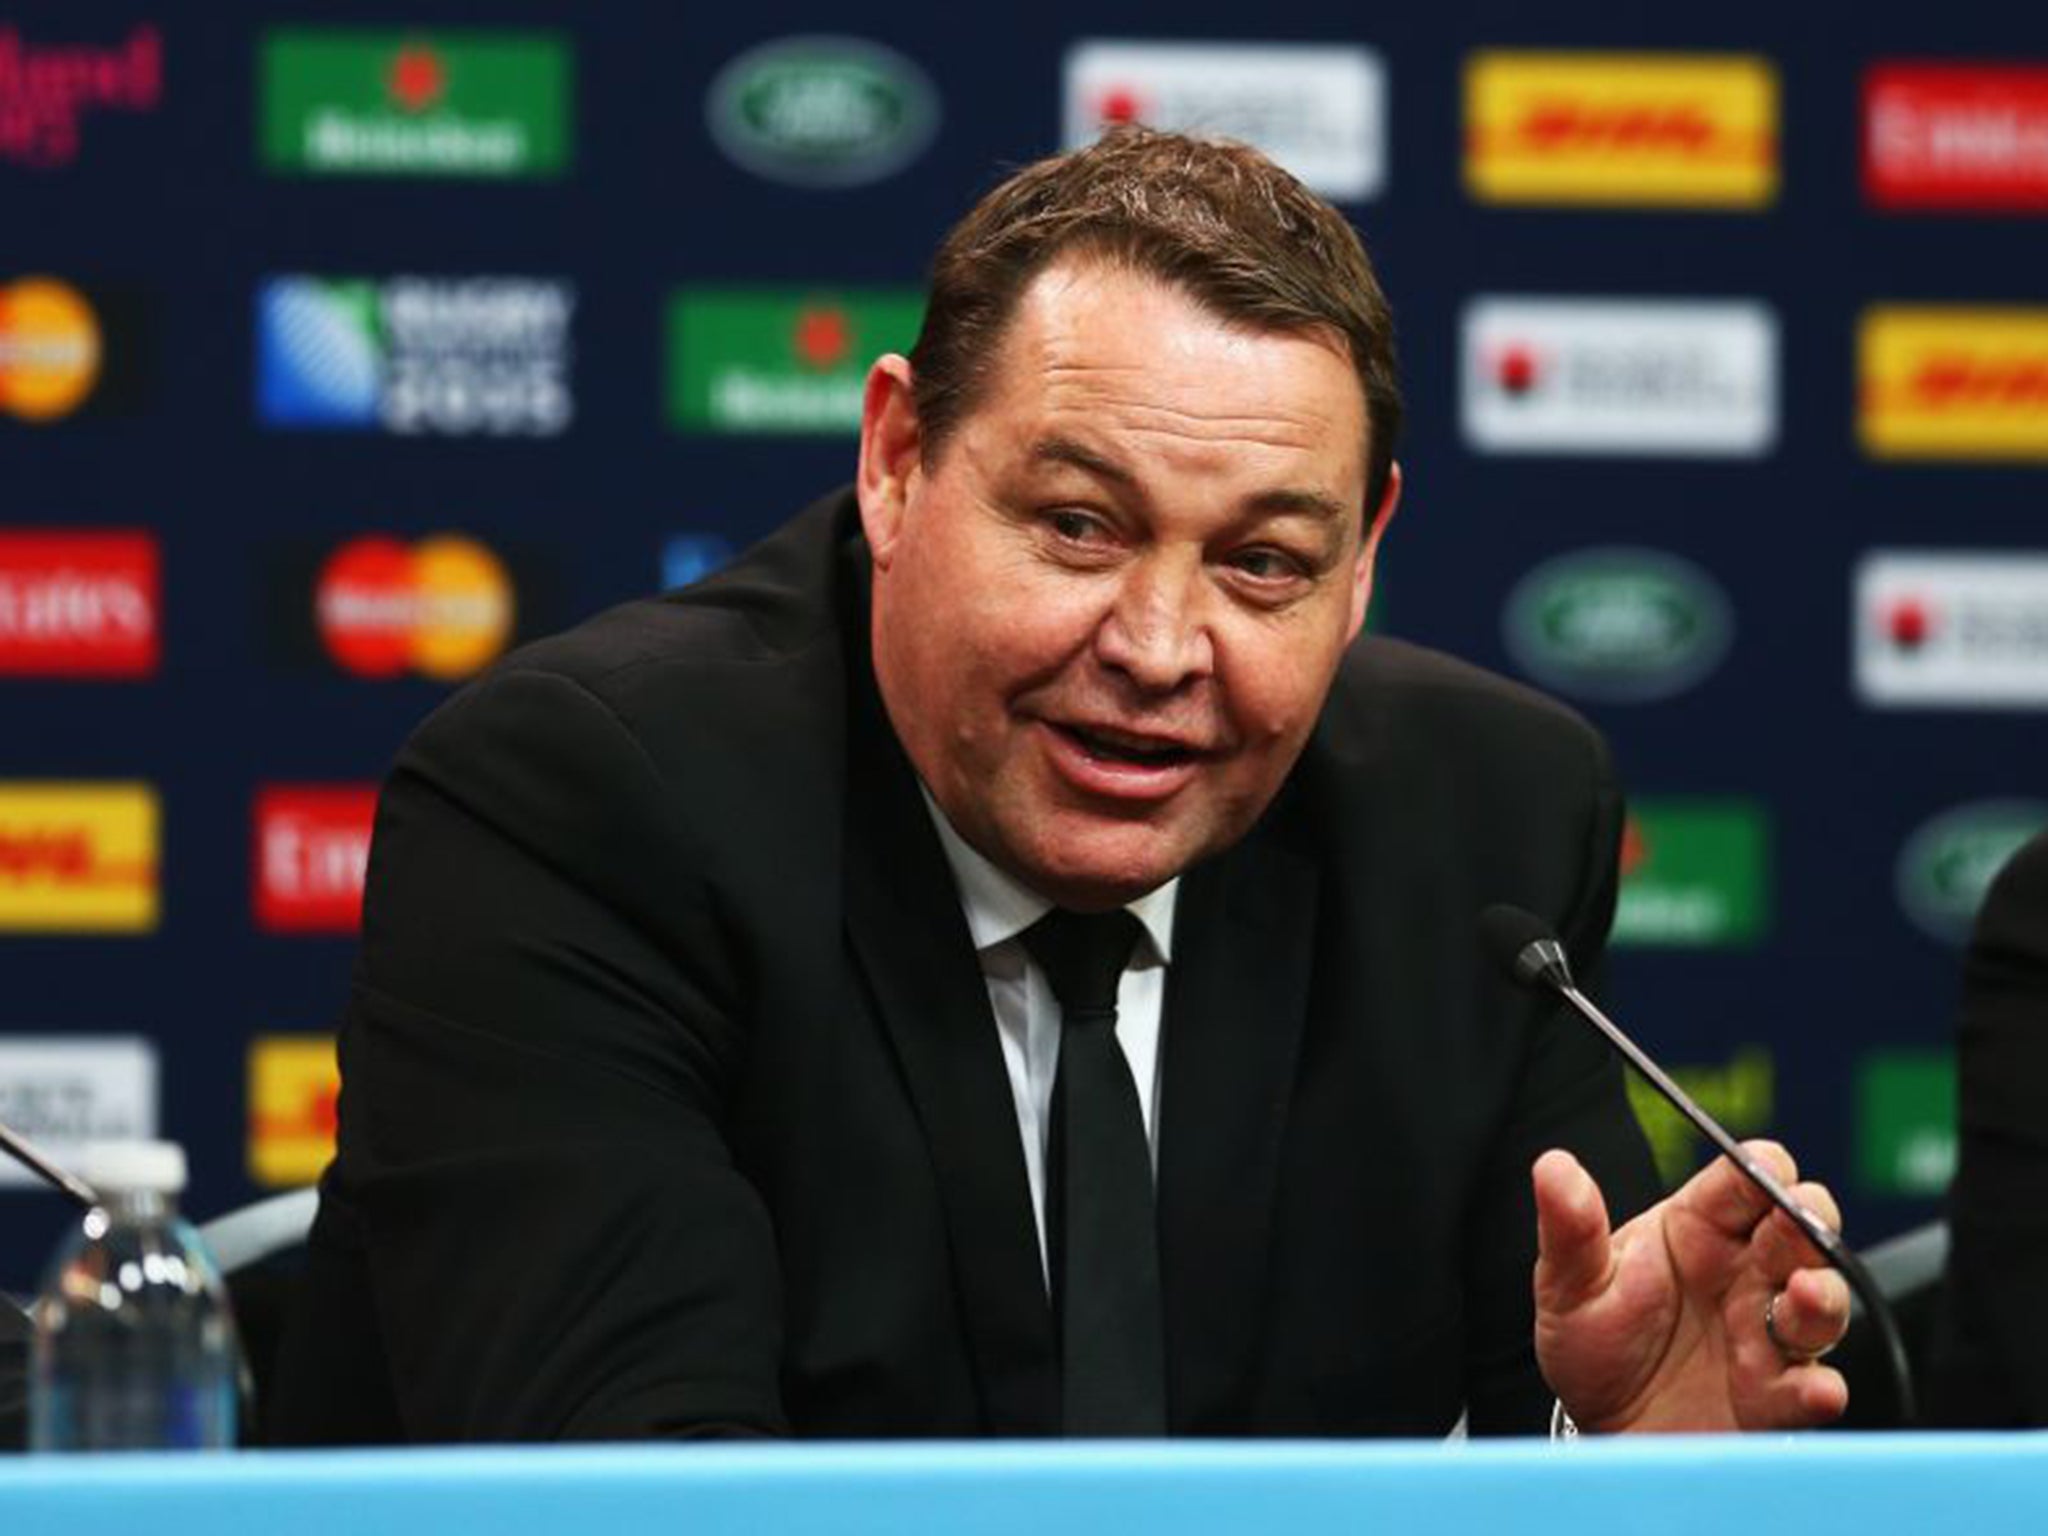 Steve Hansen (NZ) Head coach New Zealand, 56, contracted until the end of 2017. Unflappable Kiwi, had a decent 2003 World Cup leading Wales. Overriding appeal is being imbued with New Zealand expertise. Could bring Wayne Smith with him